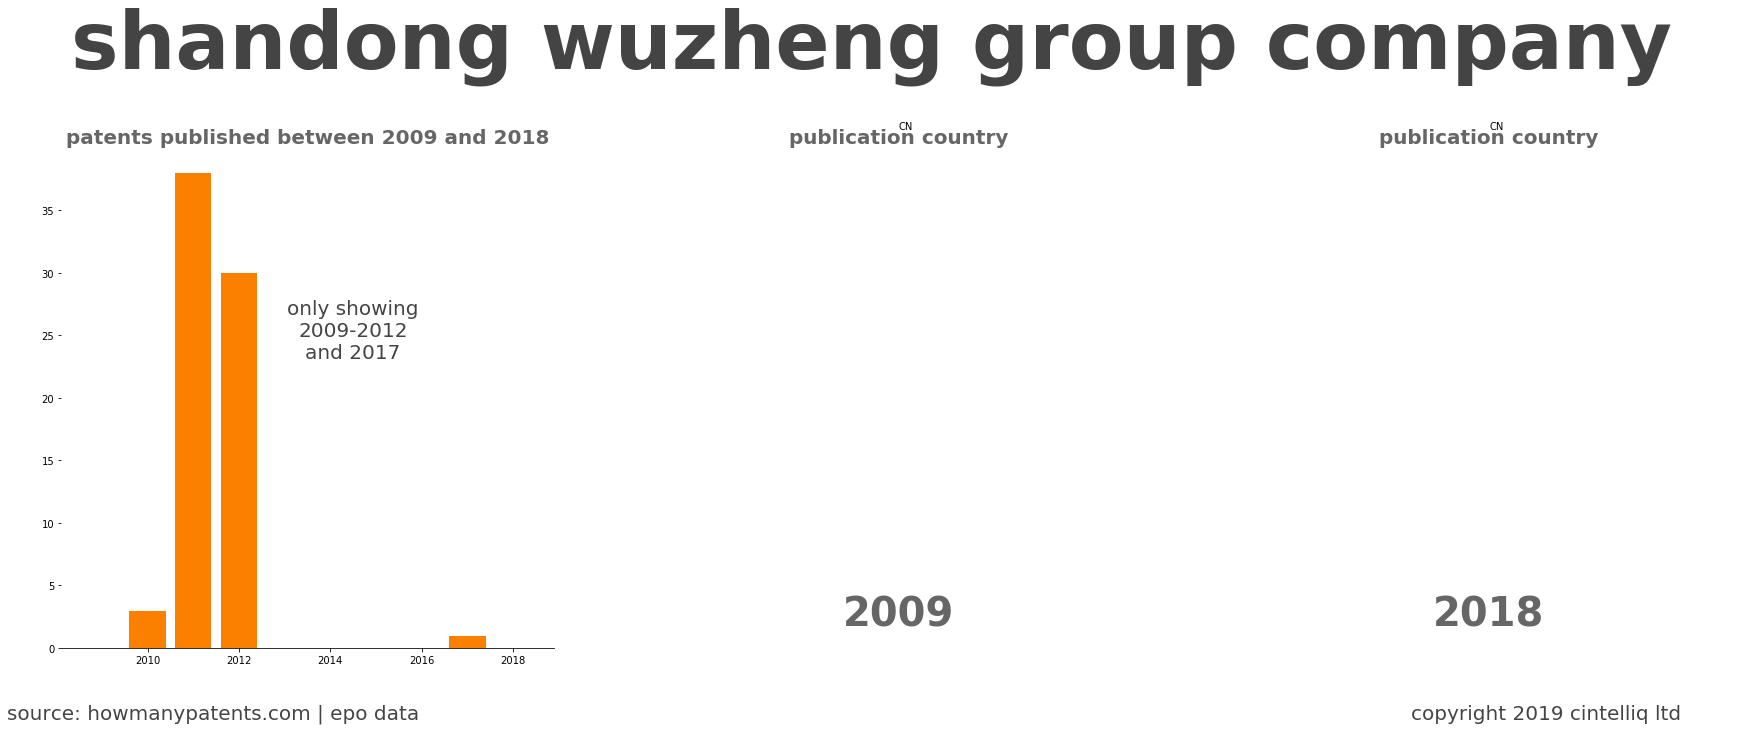 summary of patents for Shandong Wuzheng Group Company